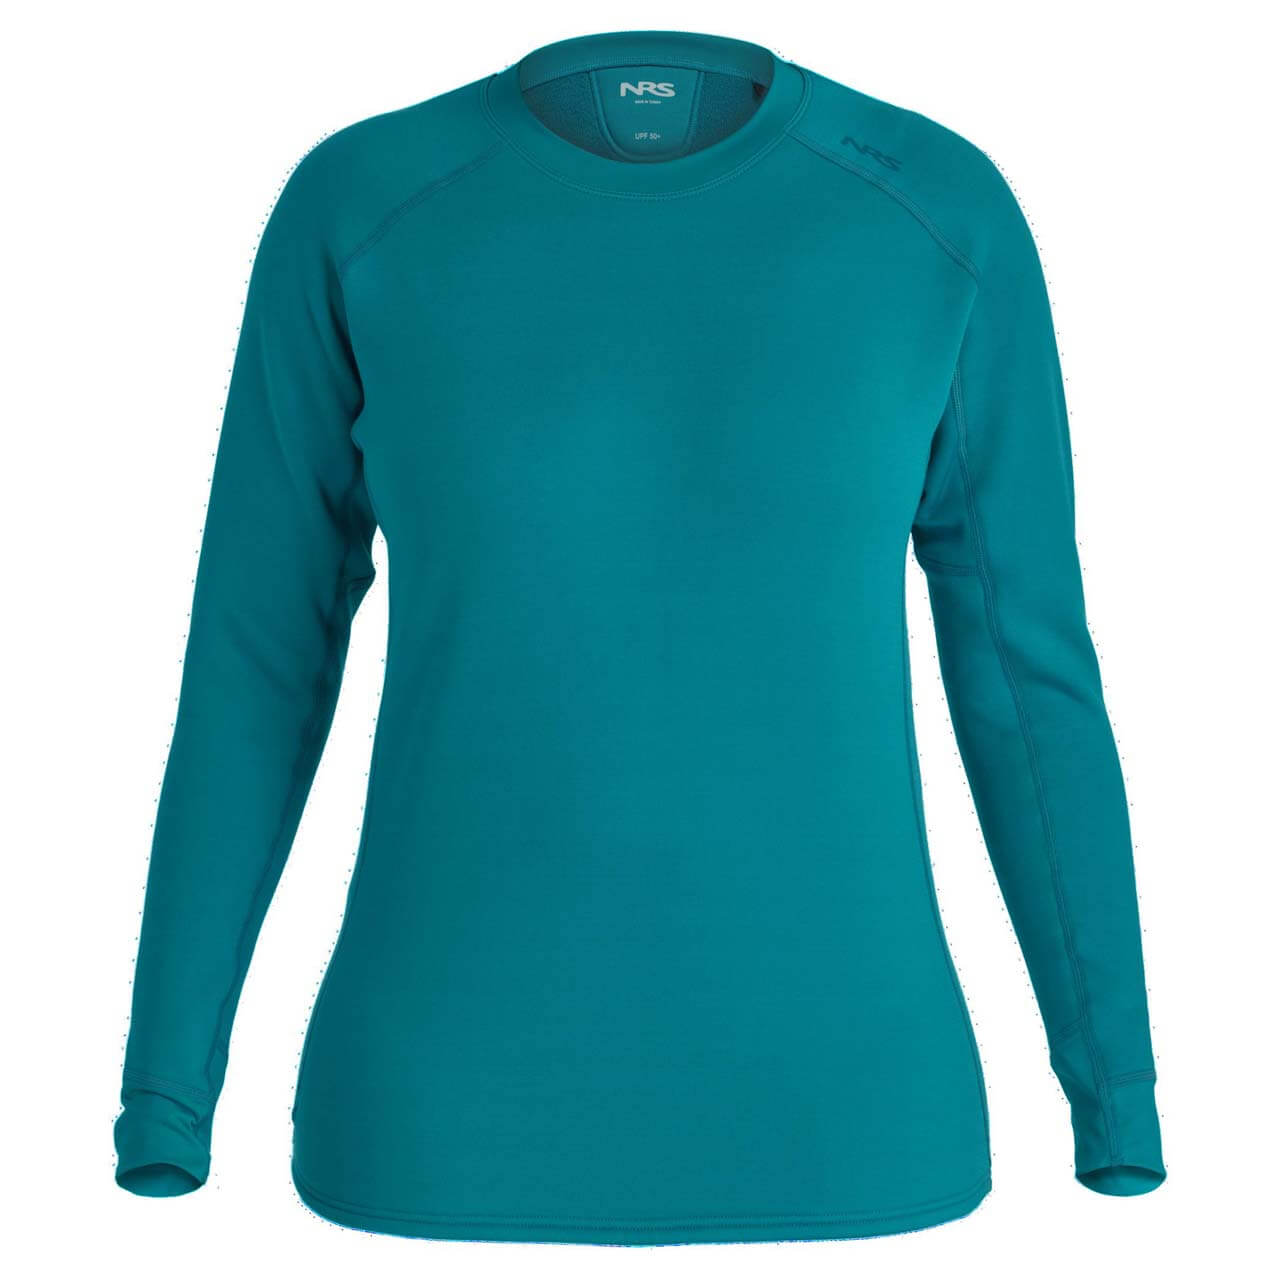 NRS Expedition Weight Shirt Women - Glacier, M